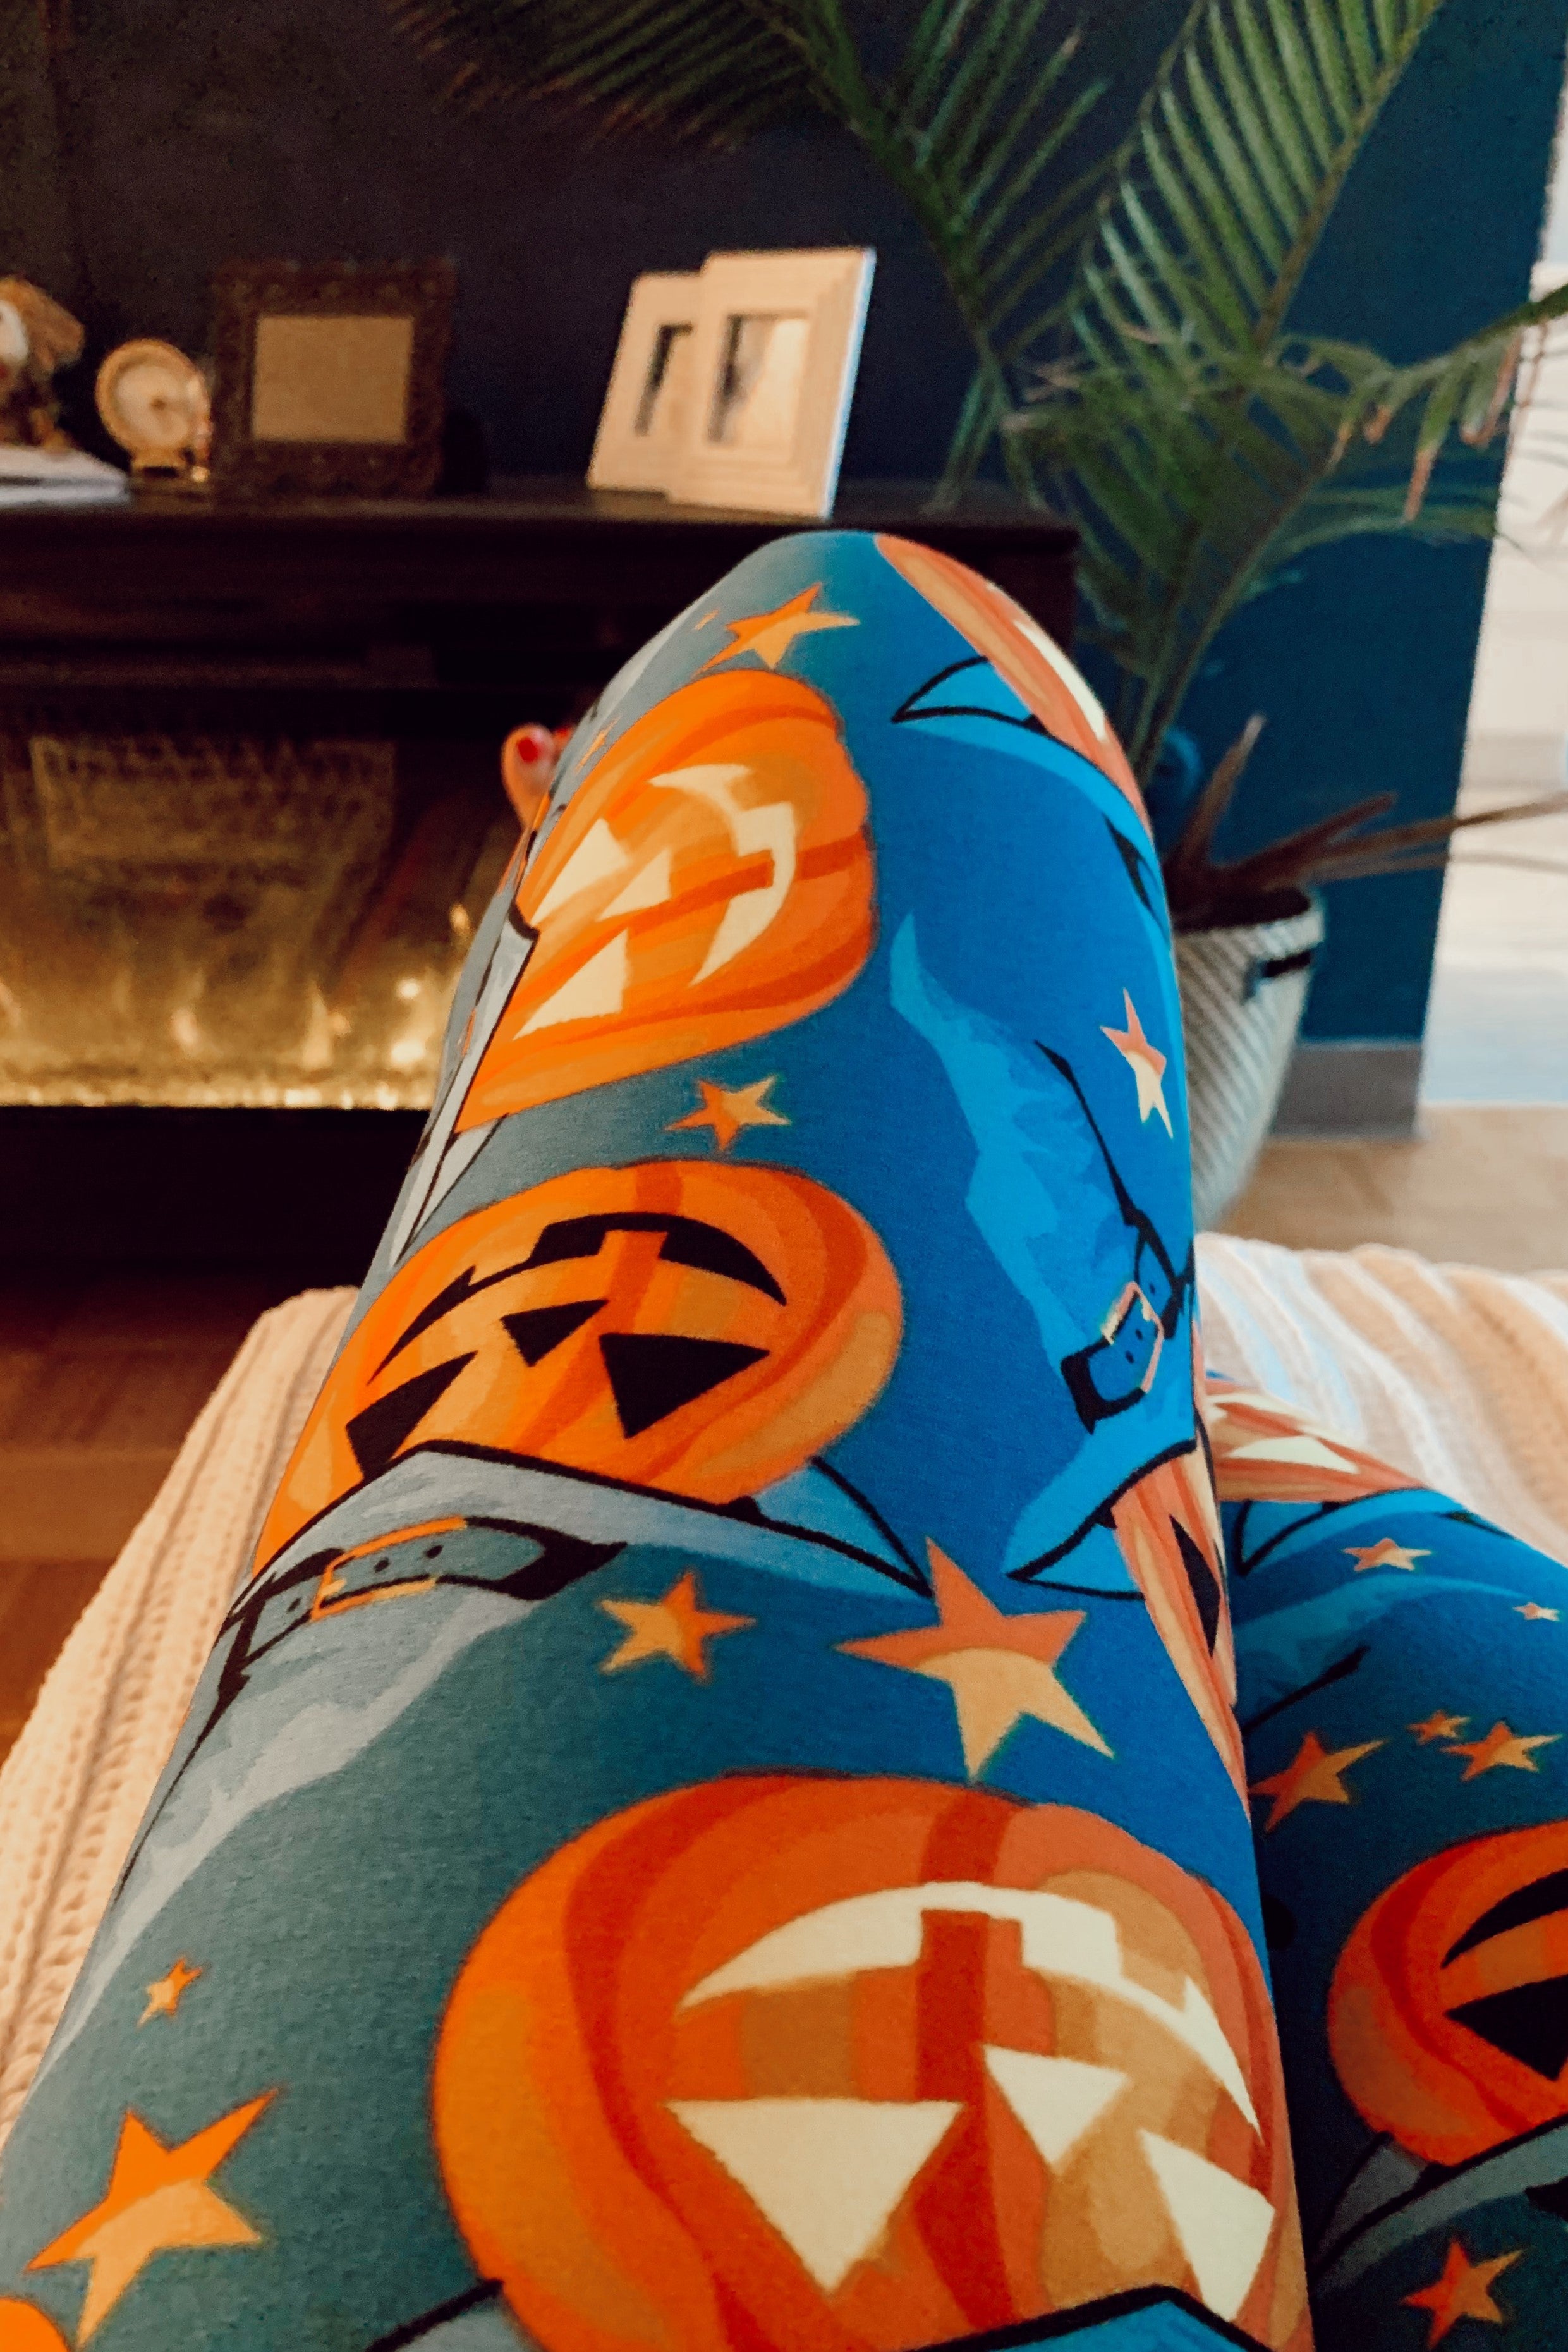 https://cdn.shopify.com/s/files/1/0826/7333/collections/halloween-pumpkin-print-patterned-elegant-stylish-print-festival-sports-buttery-soft-brushed-women-yoga-online-leggings-tights-one-size-nonseethrough_2.jpg?v=1570225770